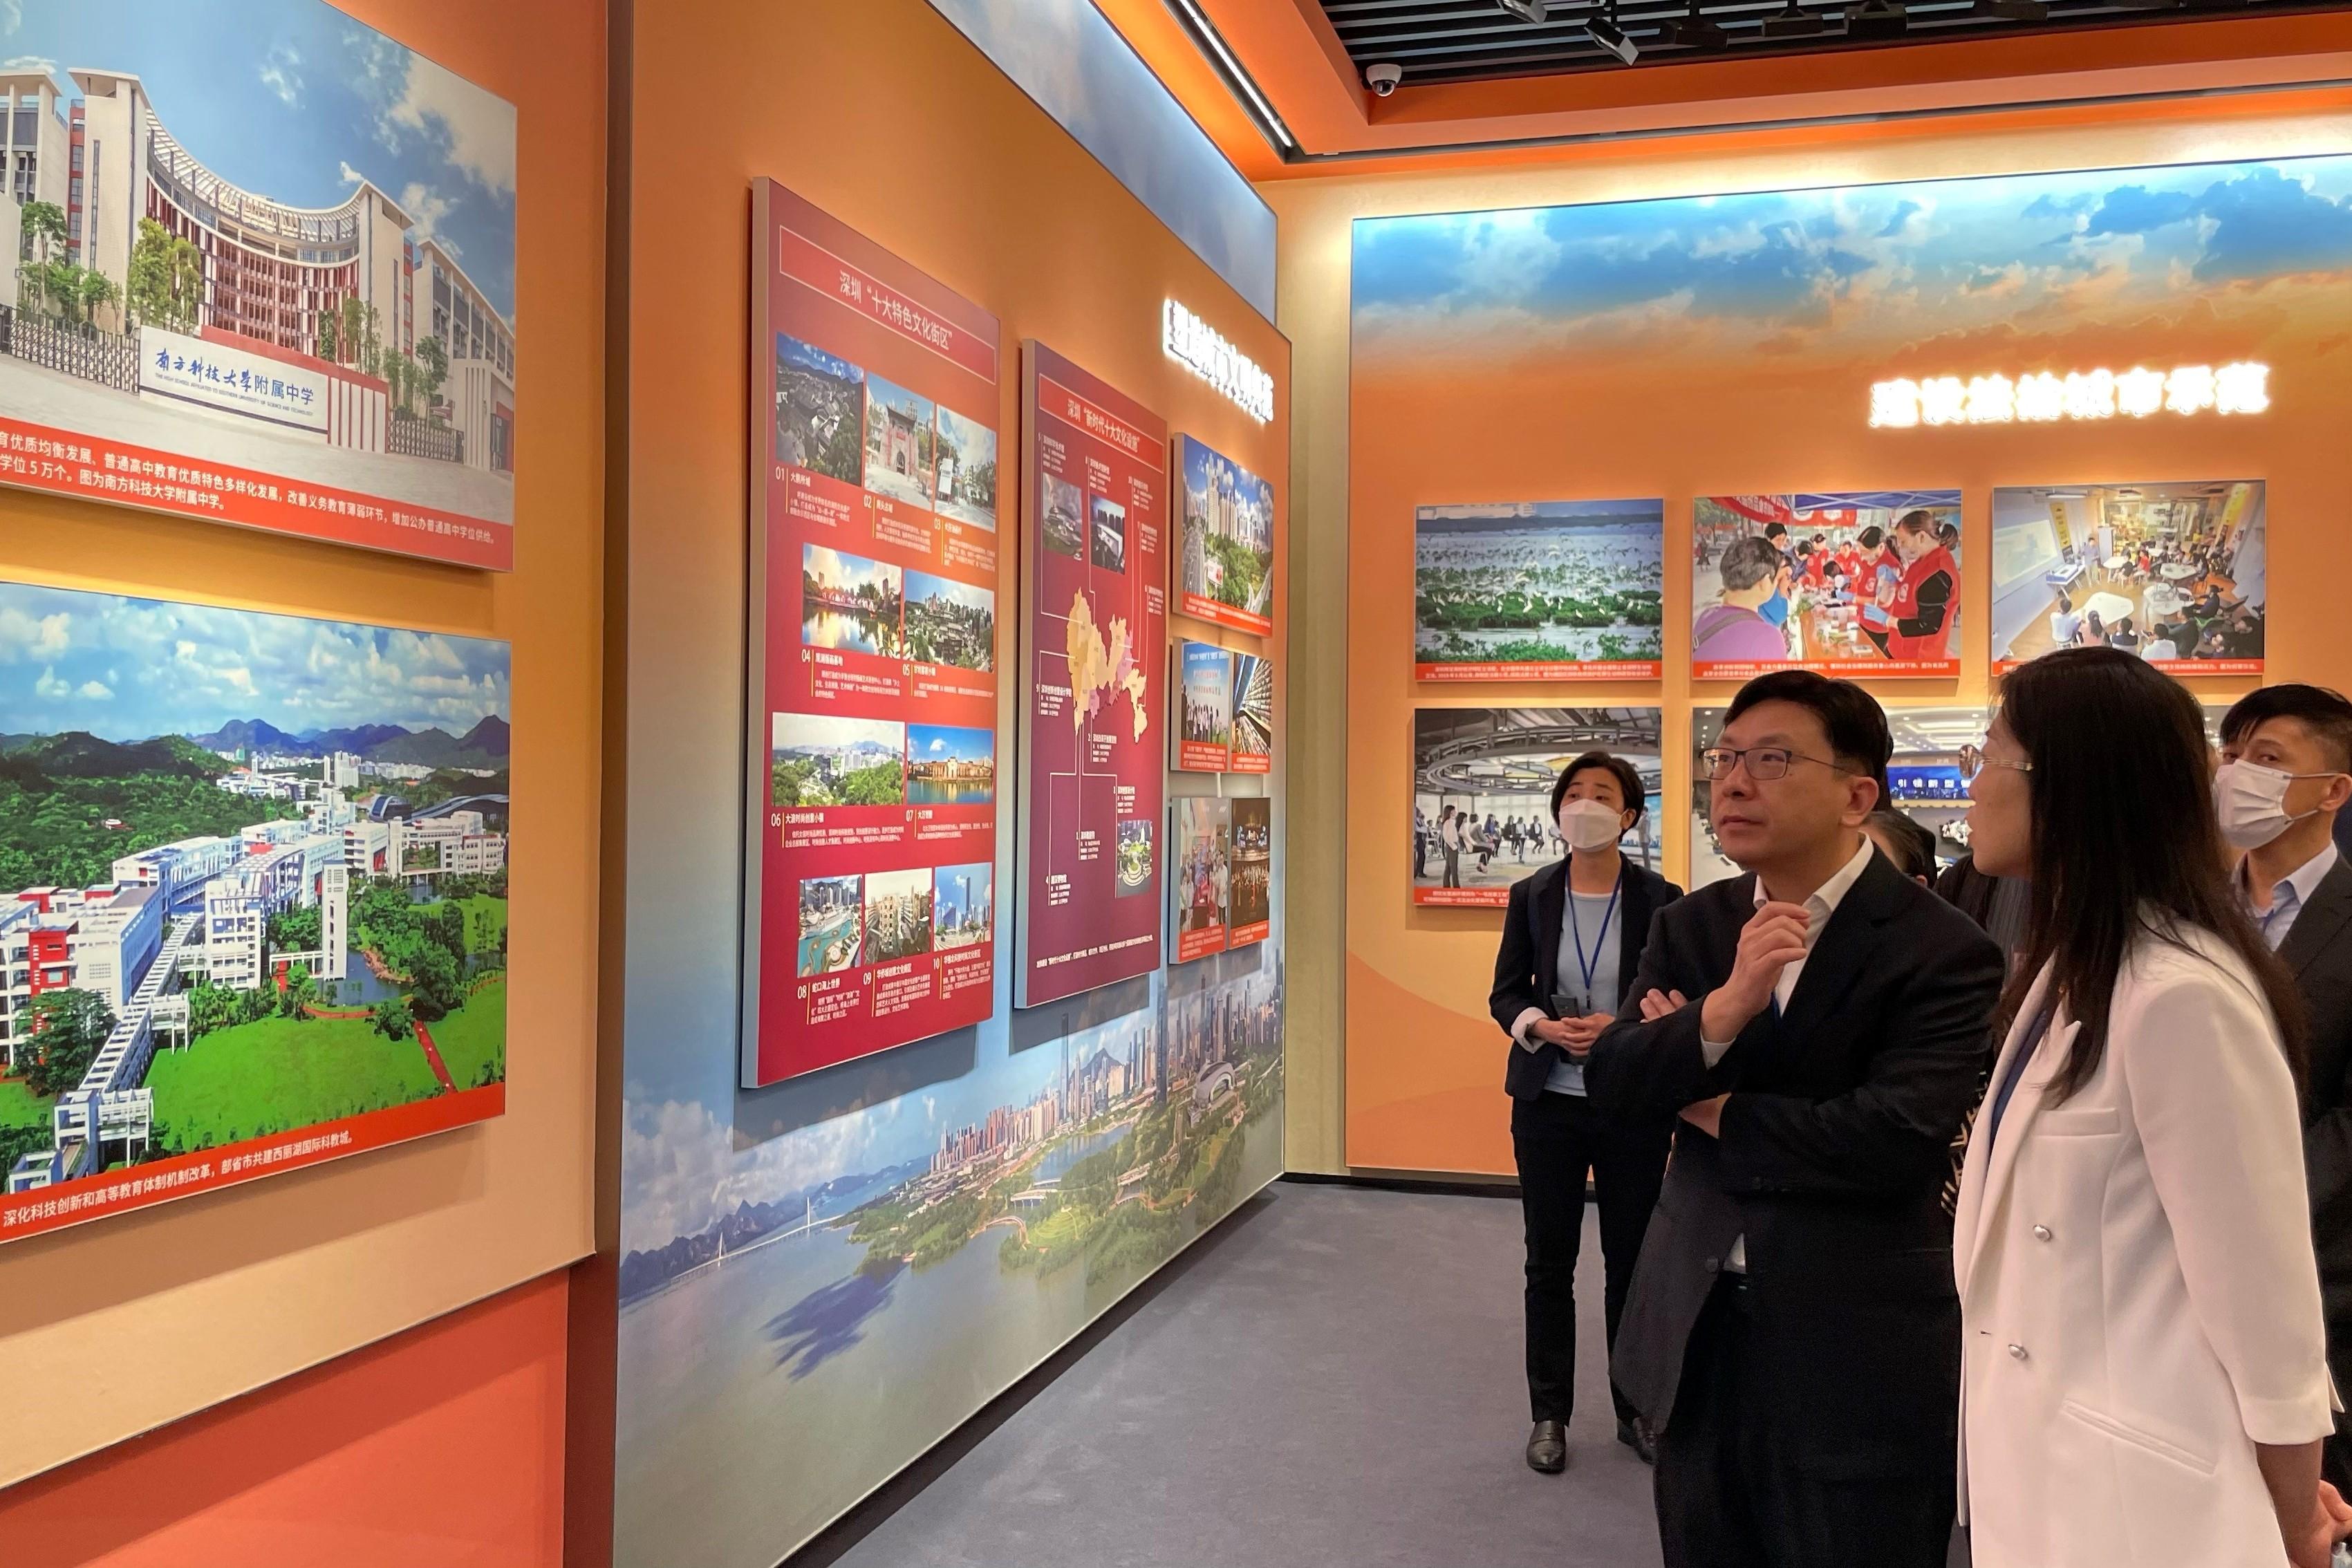 The Secretary for Labour and Welfare, Mr Chris Sun, led the Hong Kong social welfare sector delegation in a visit to Guangdong and visited the Qianhai International Convention Center this morning (April 24). Photo shows Mr Sun (front row, left) taking a look at Qianhai's latest planning and development.